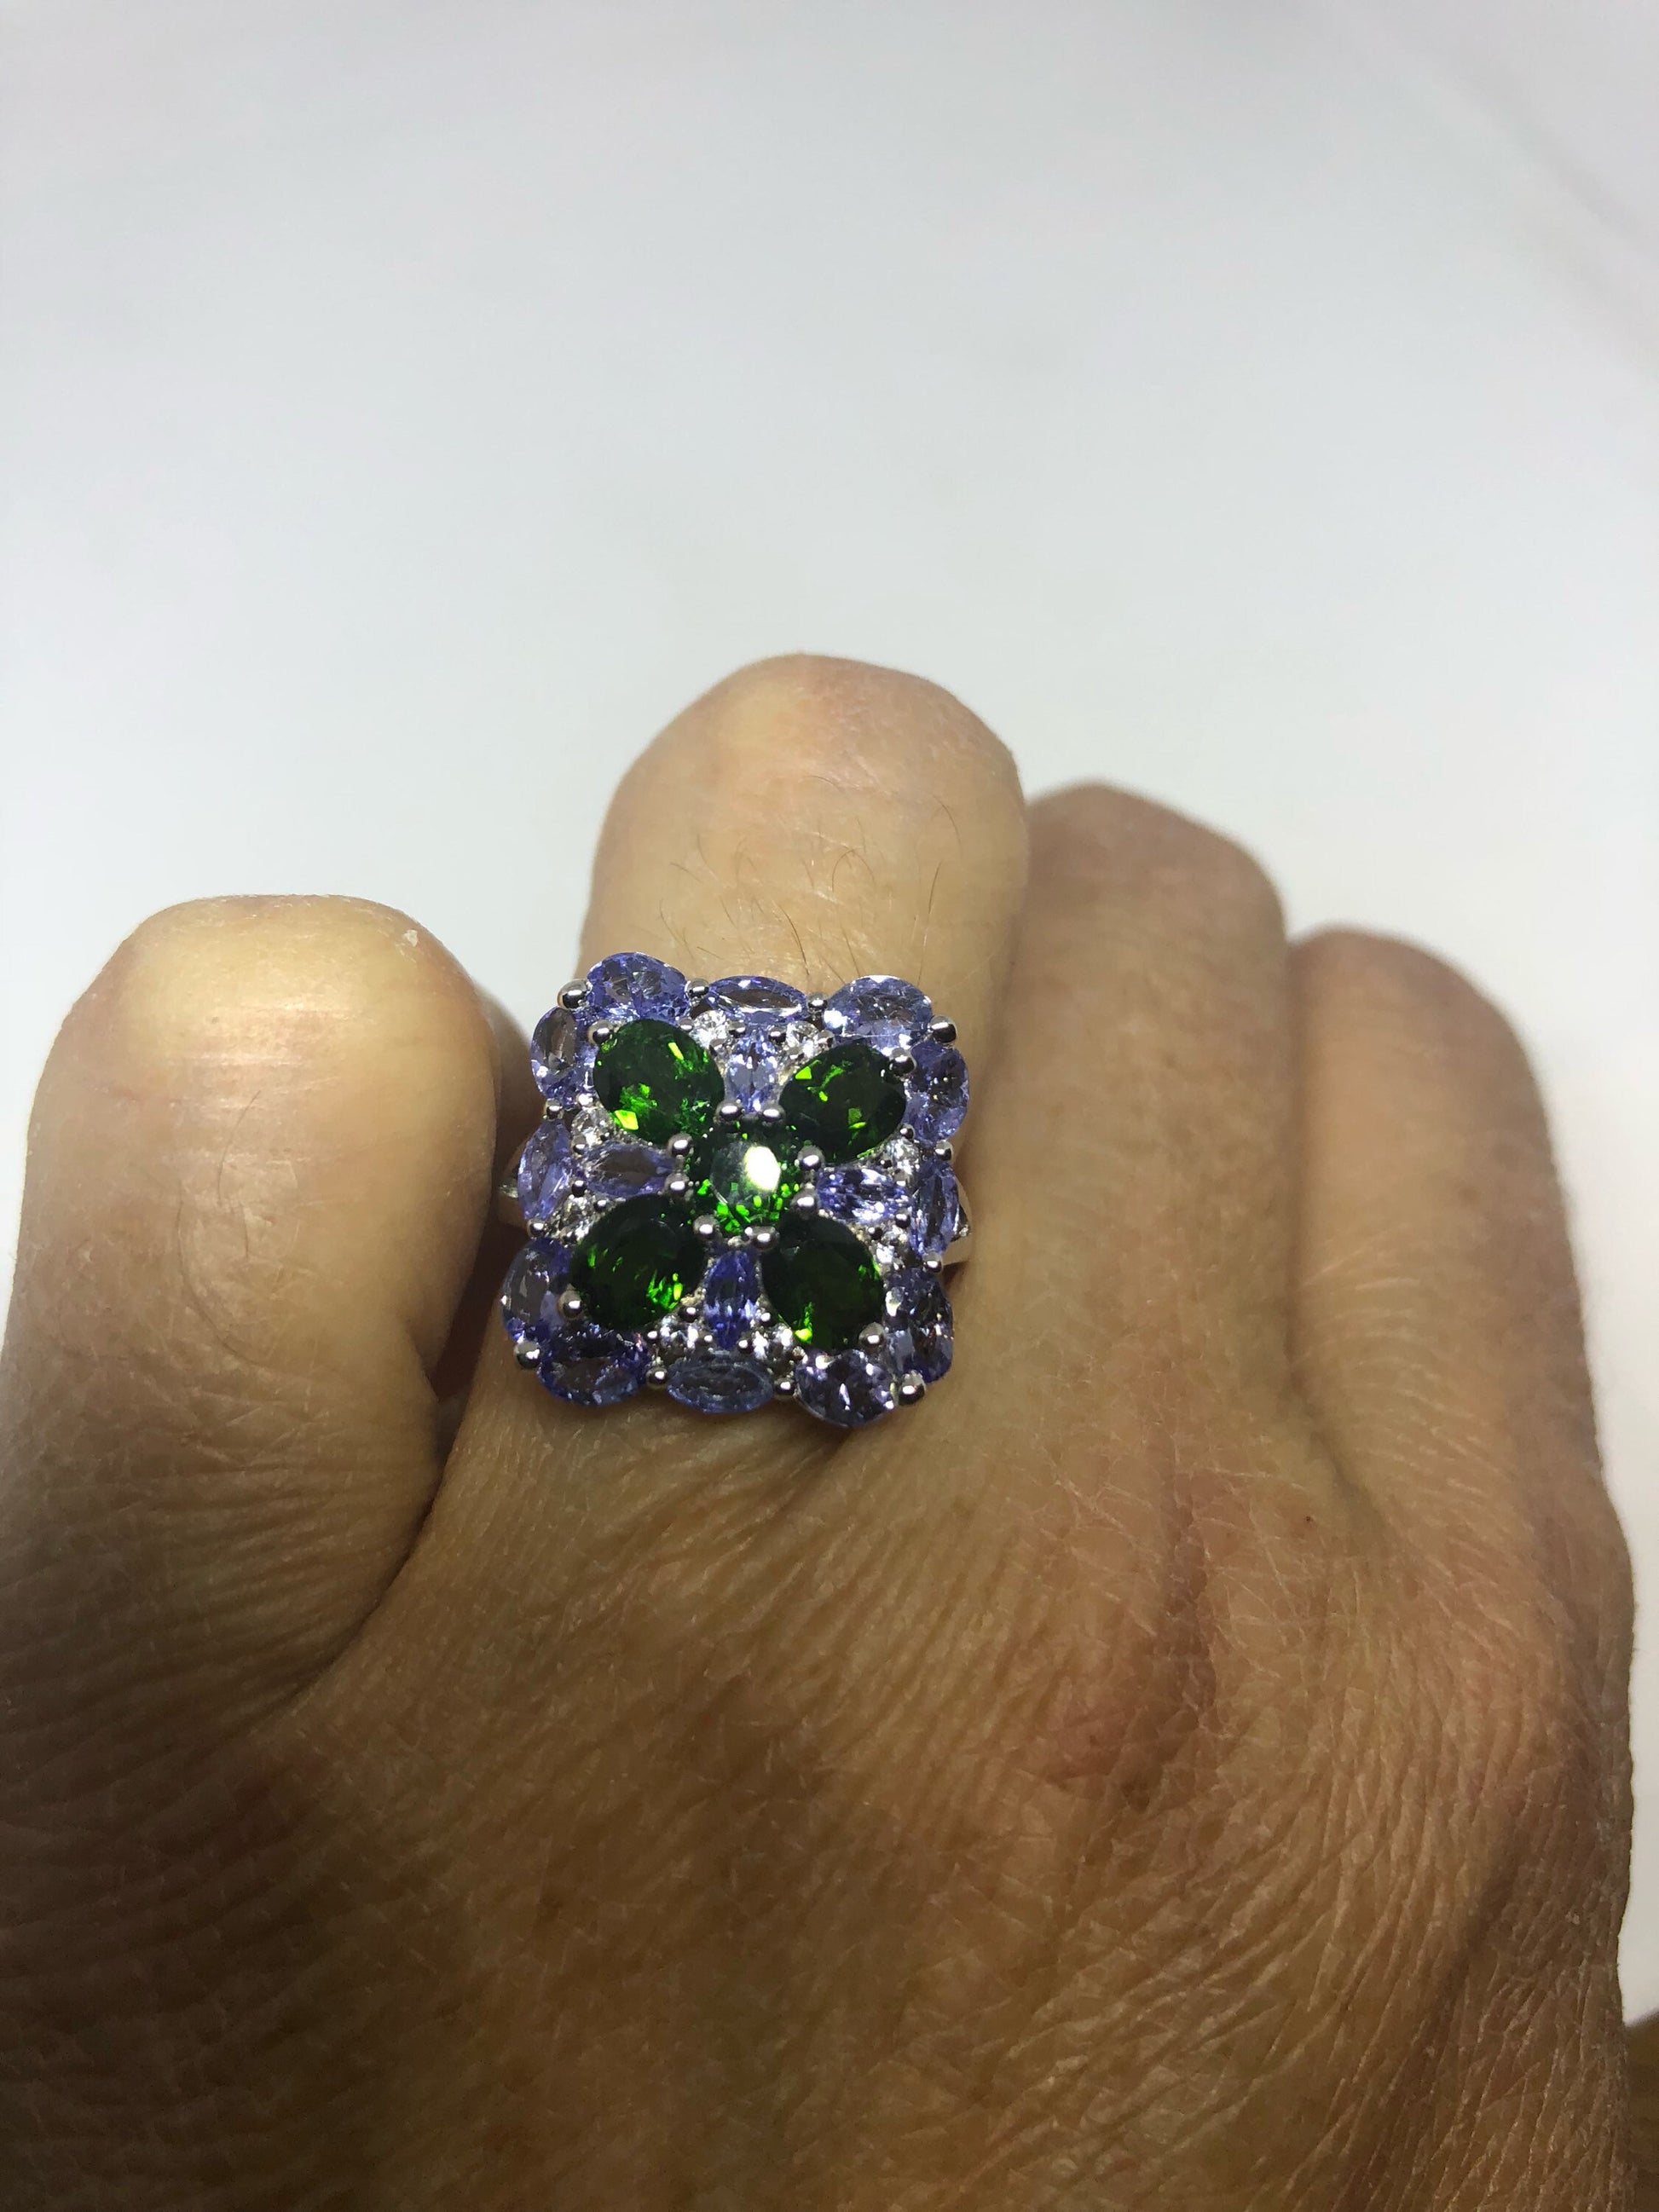 Vintage Handmade Green Chrome Diopside and Tanzanite Filigree Setting Sterling Silver Gothic Ring